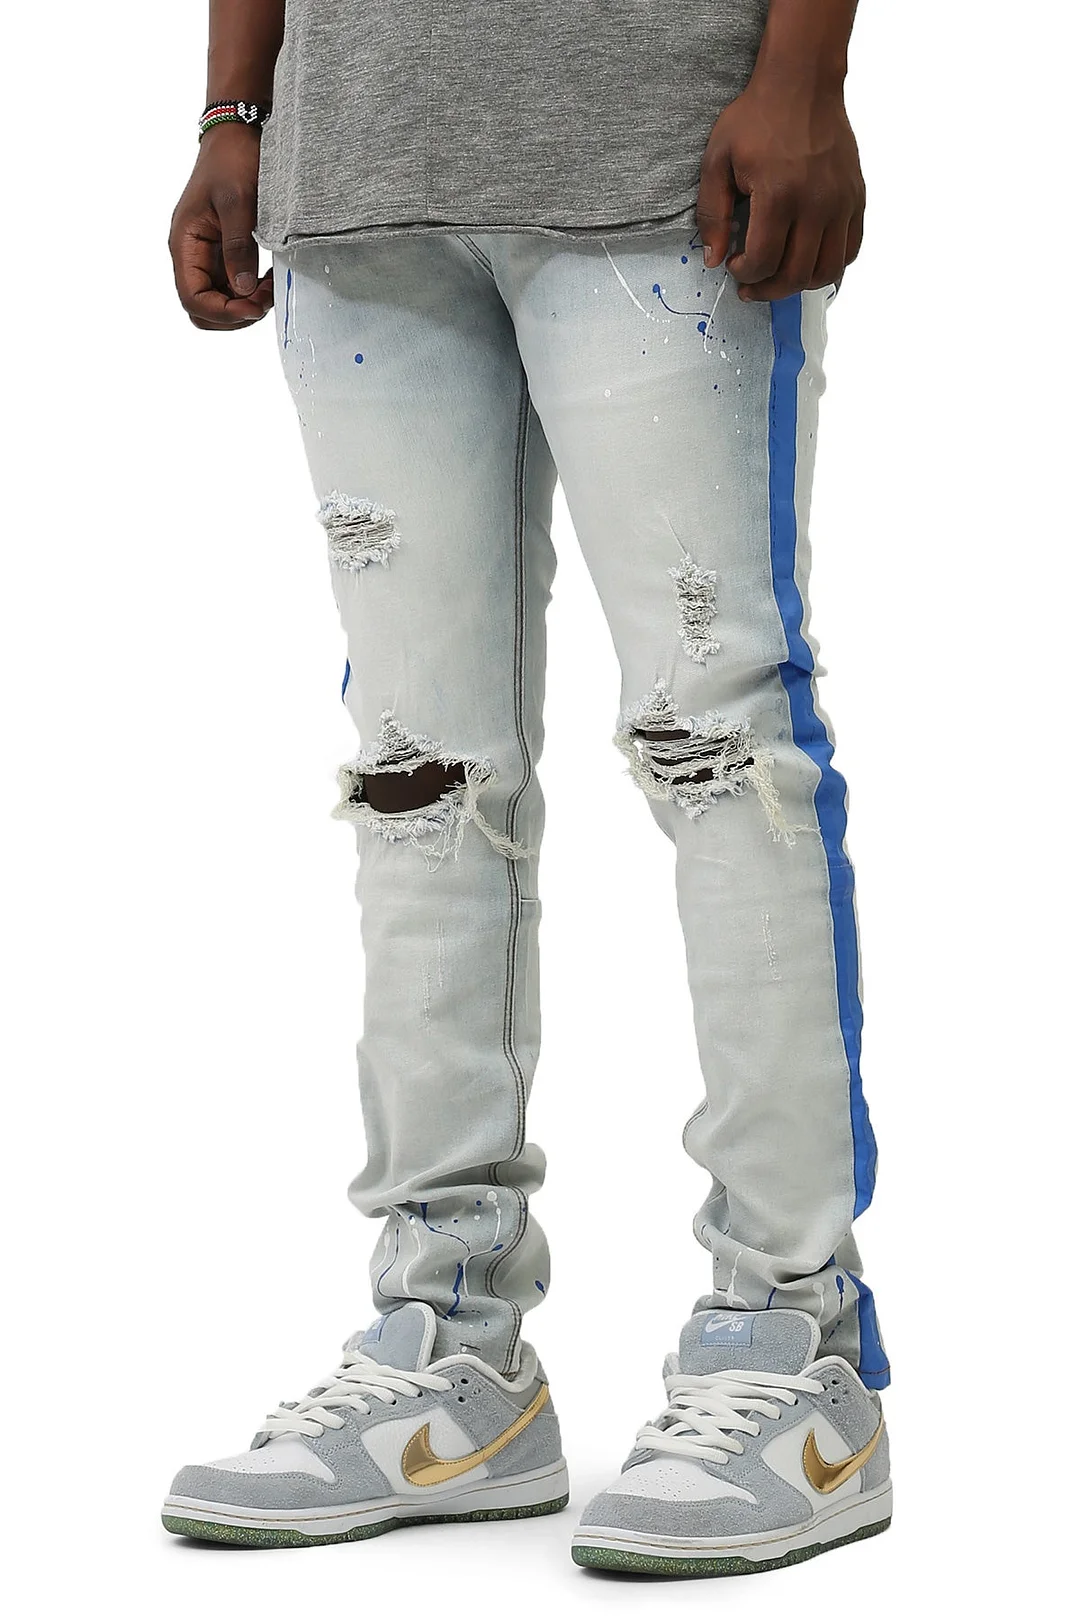 PAINT STRIPED JEANS WITH PAINT SPLATTER